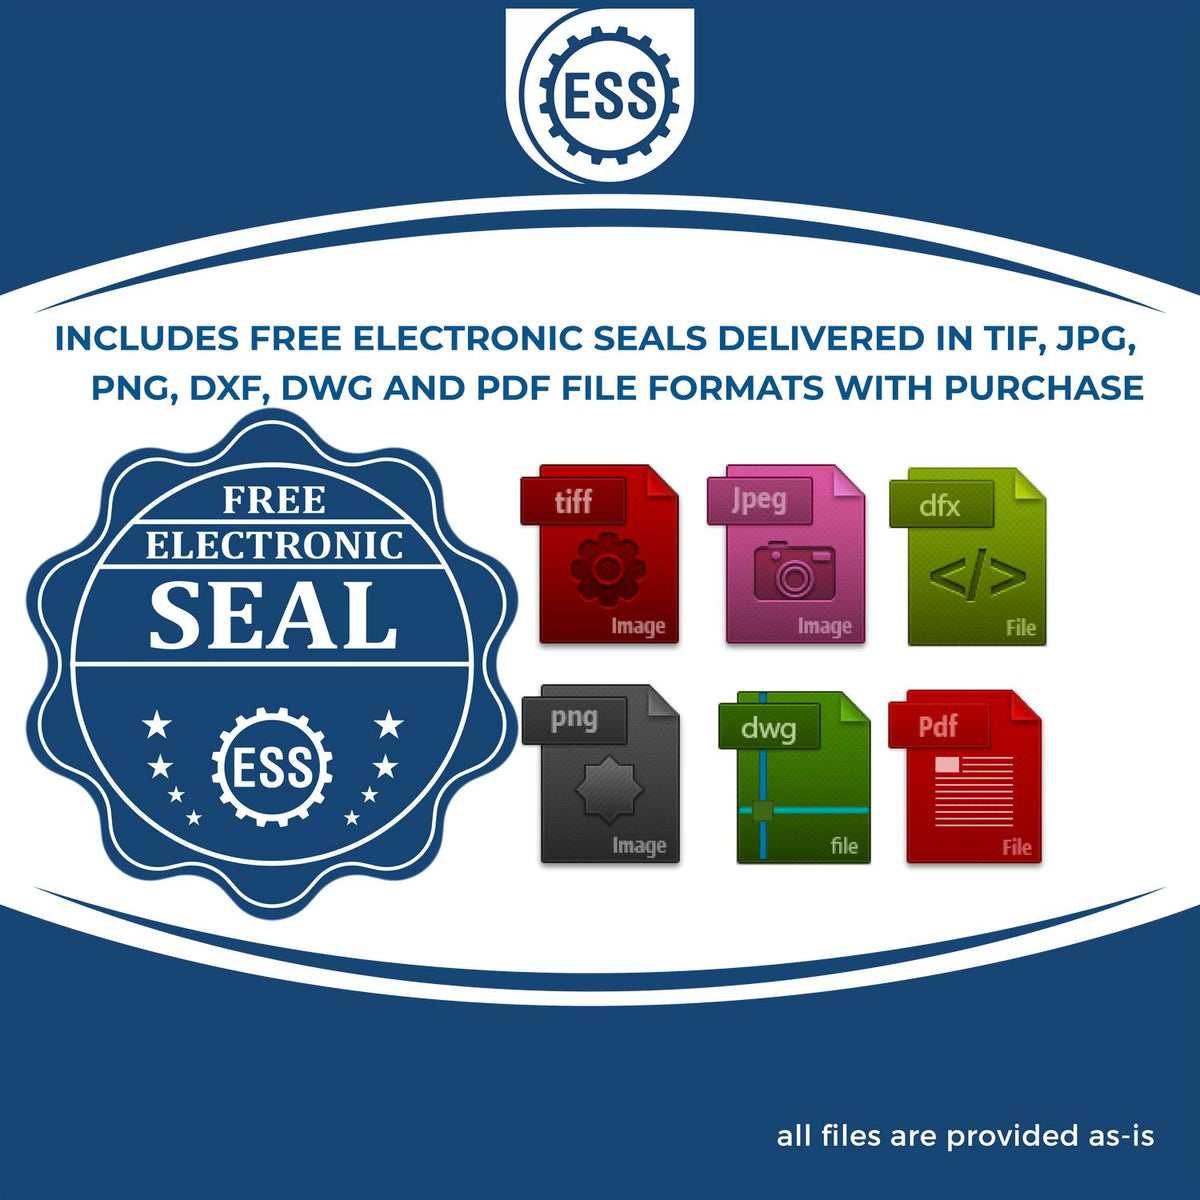 An infographic for the free electronic seal for the Slim Pre-Inked Arizona Land Surveyor Seal Stamp illustrating the different file type icons such as DXF, DWG, TIF, JPG and PNG.